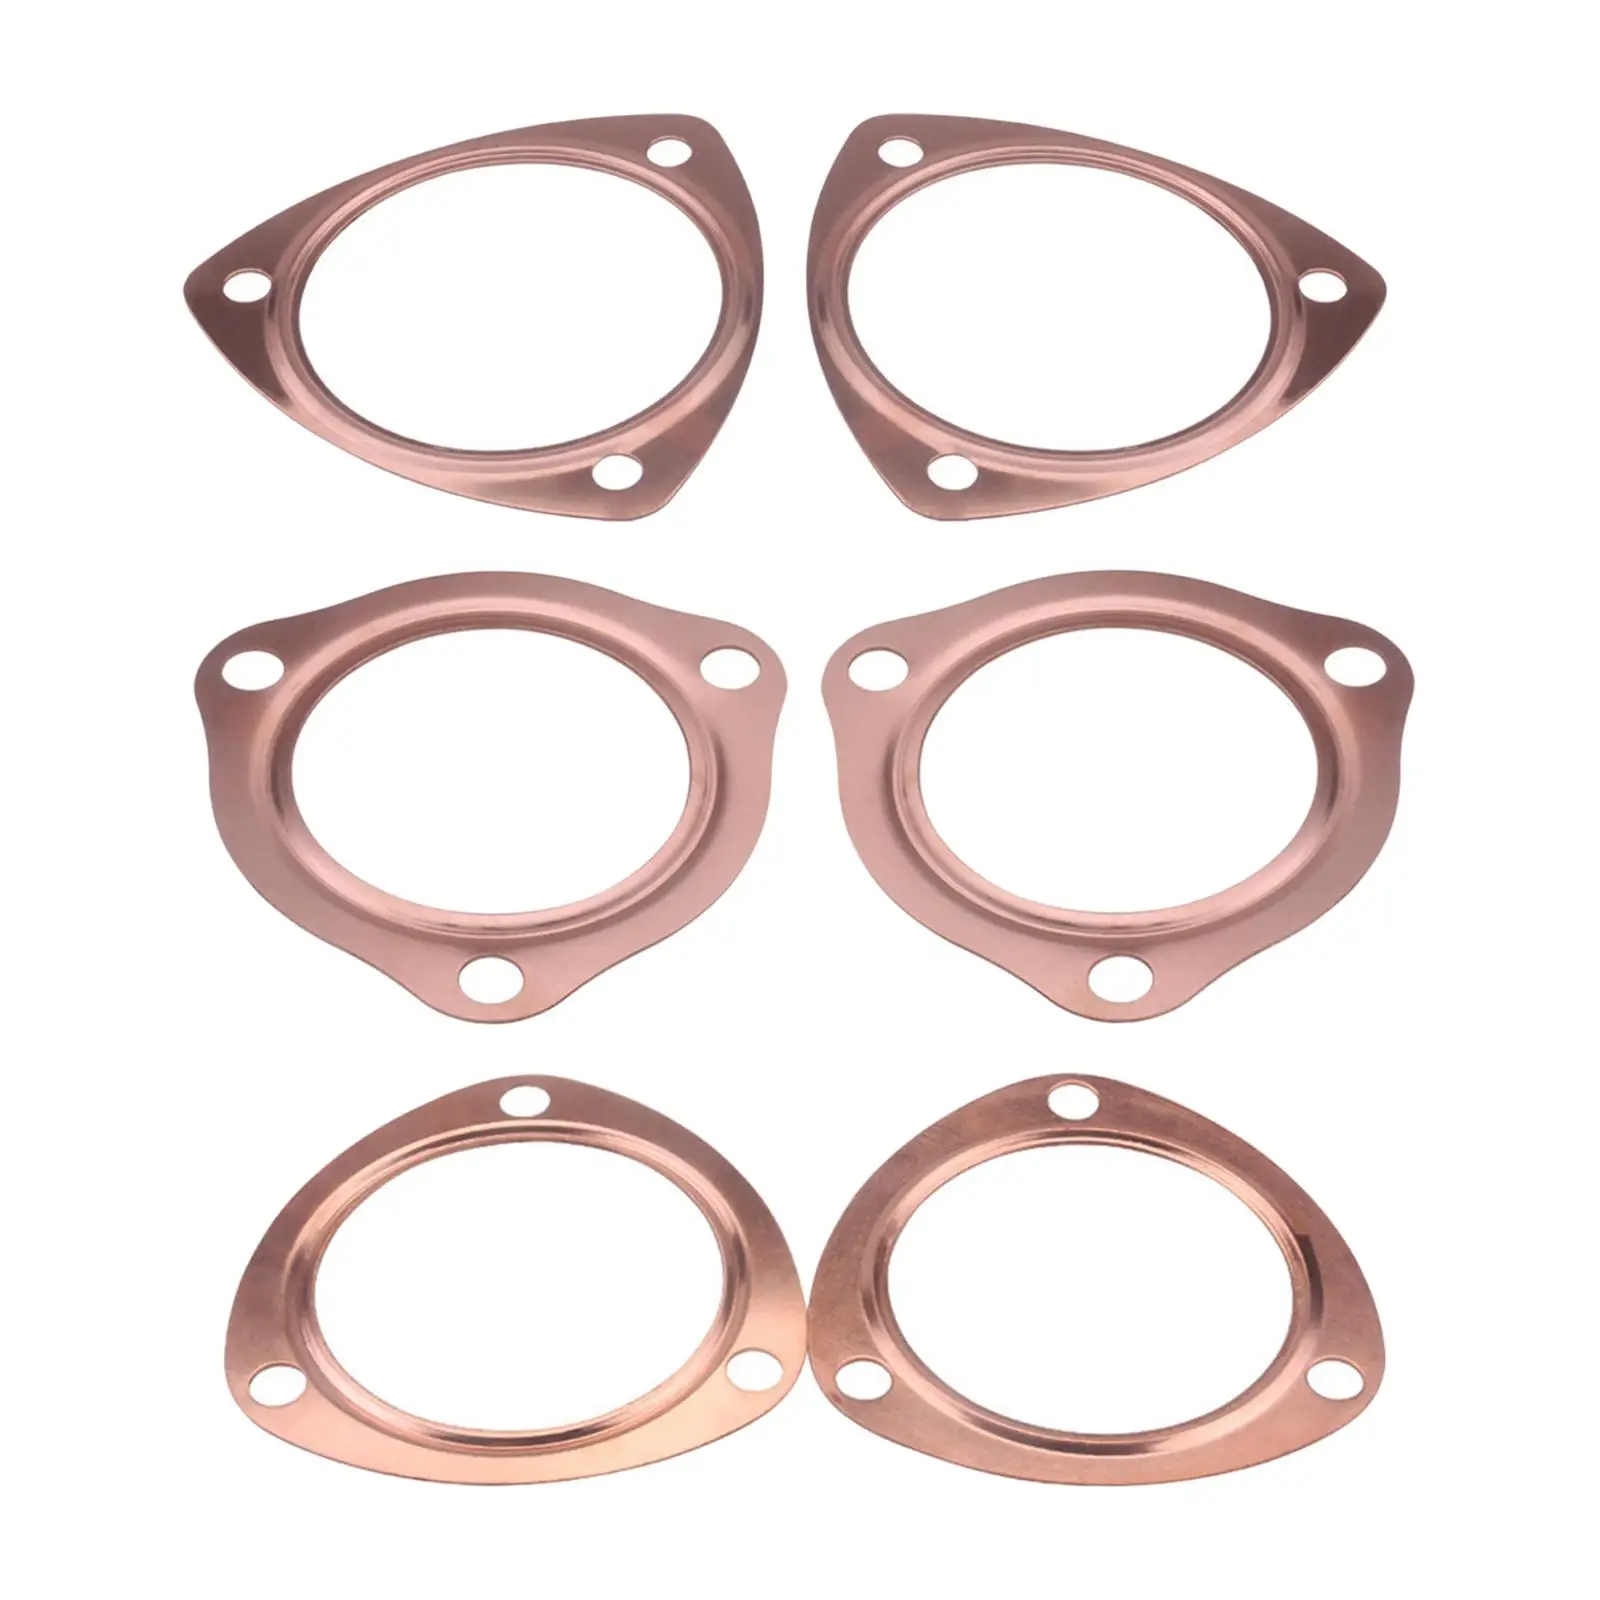 Header Collector Gaskets Durable for Sbc Bbc 302 350 454 Replaces Spare Parts